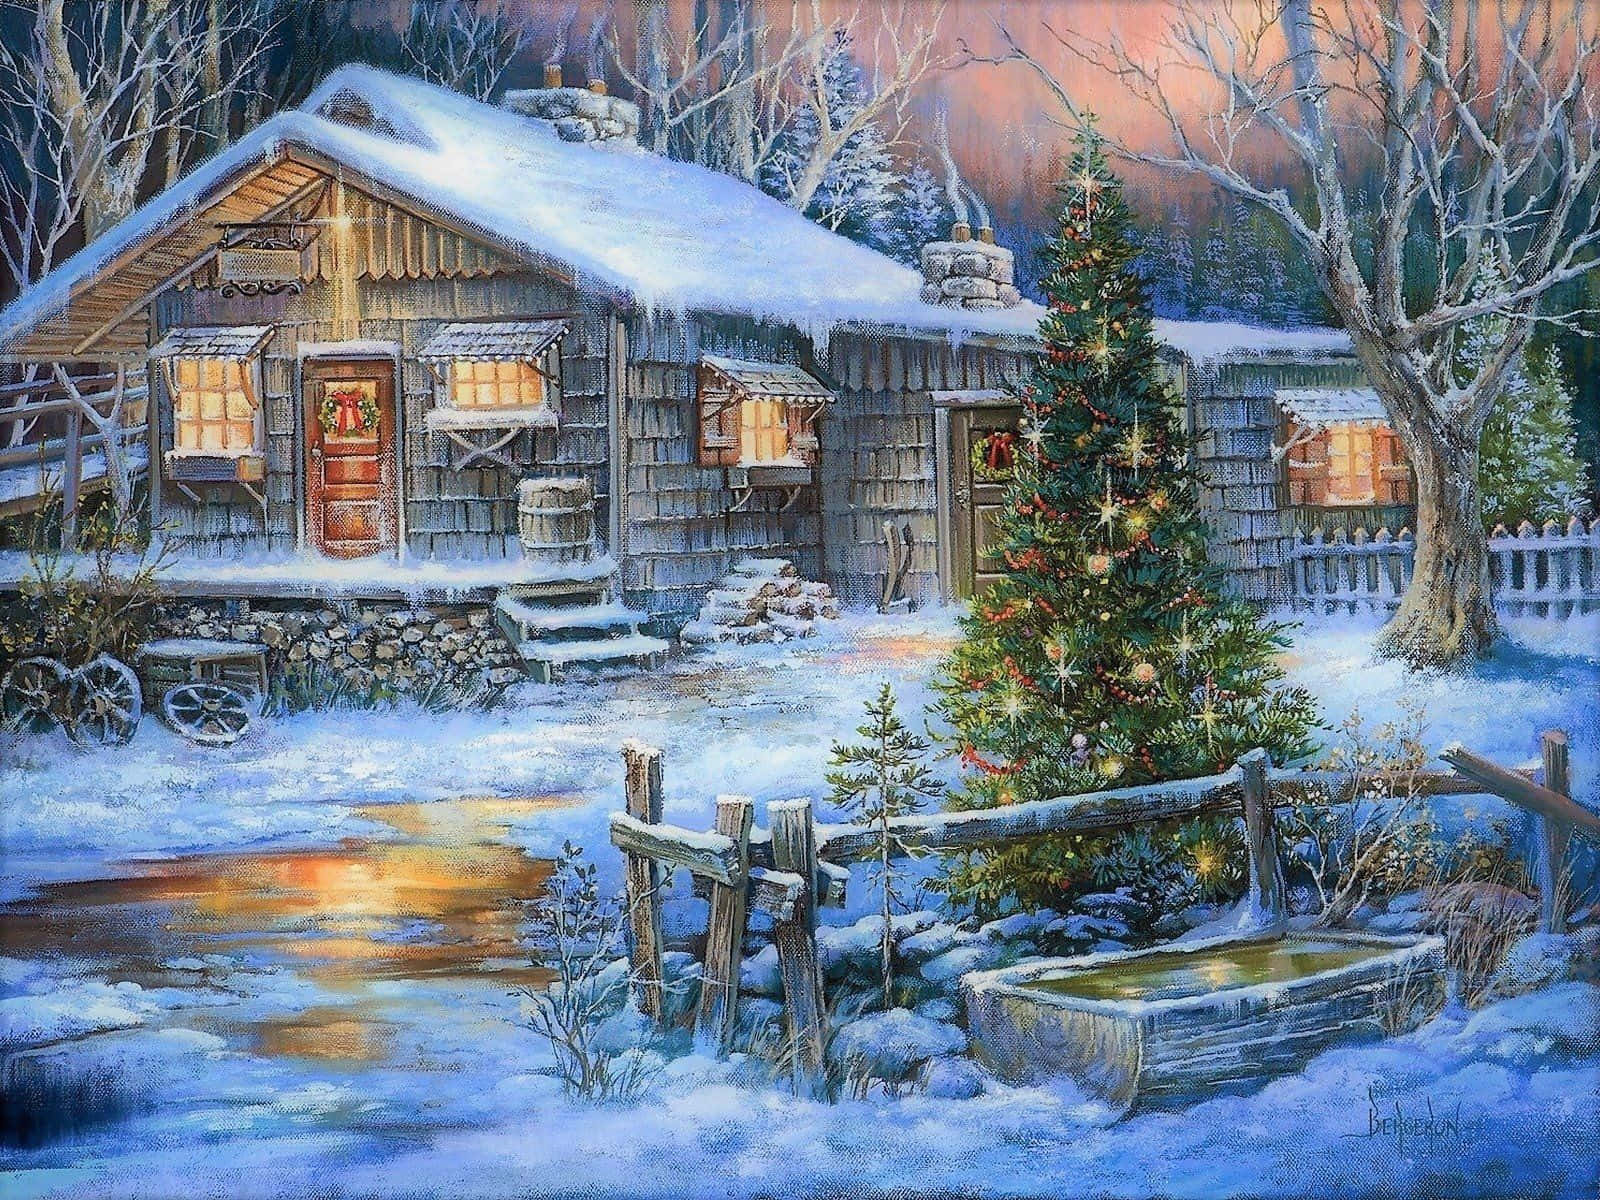 A Painting Of A Cabin In The Snow Wallpaper